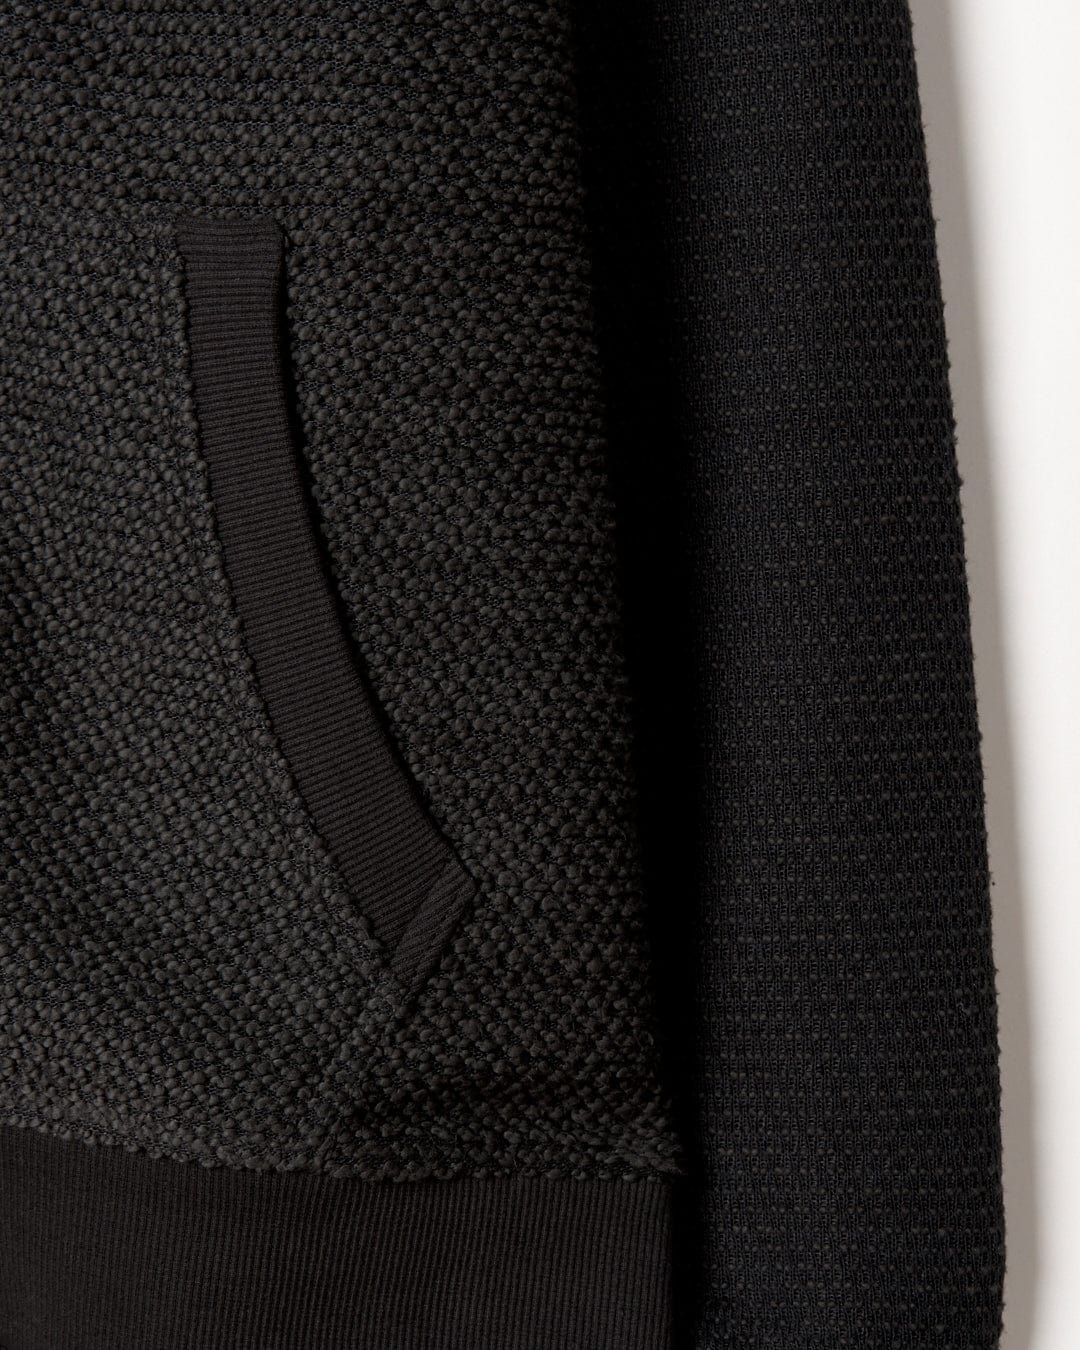 A close up of a Saltrock Hall - Borg Lined Hoodie in Black knit fabric.